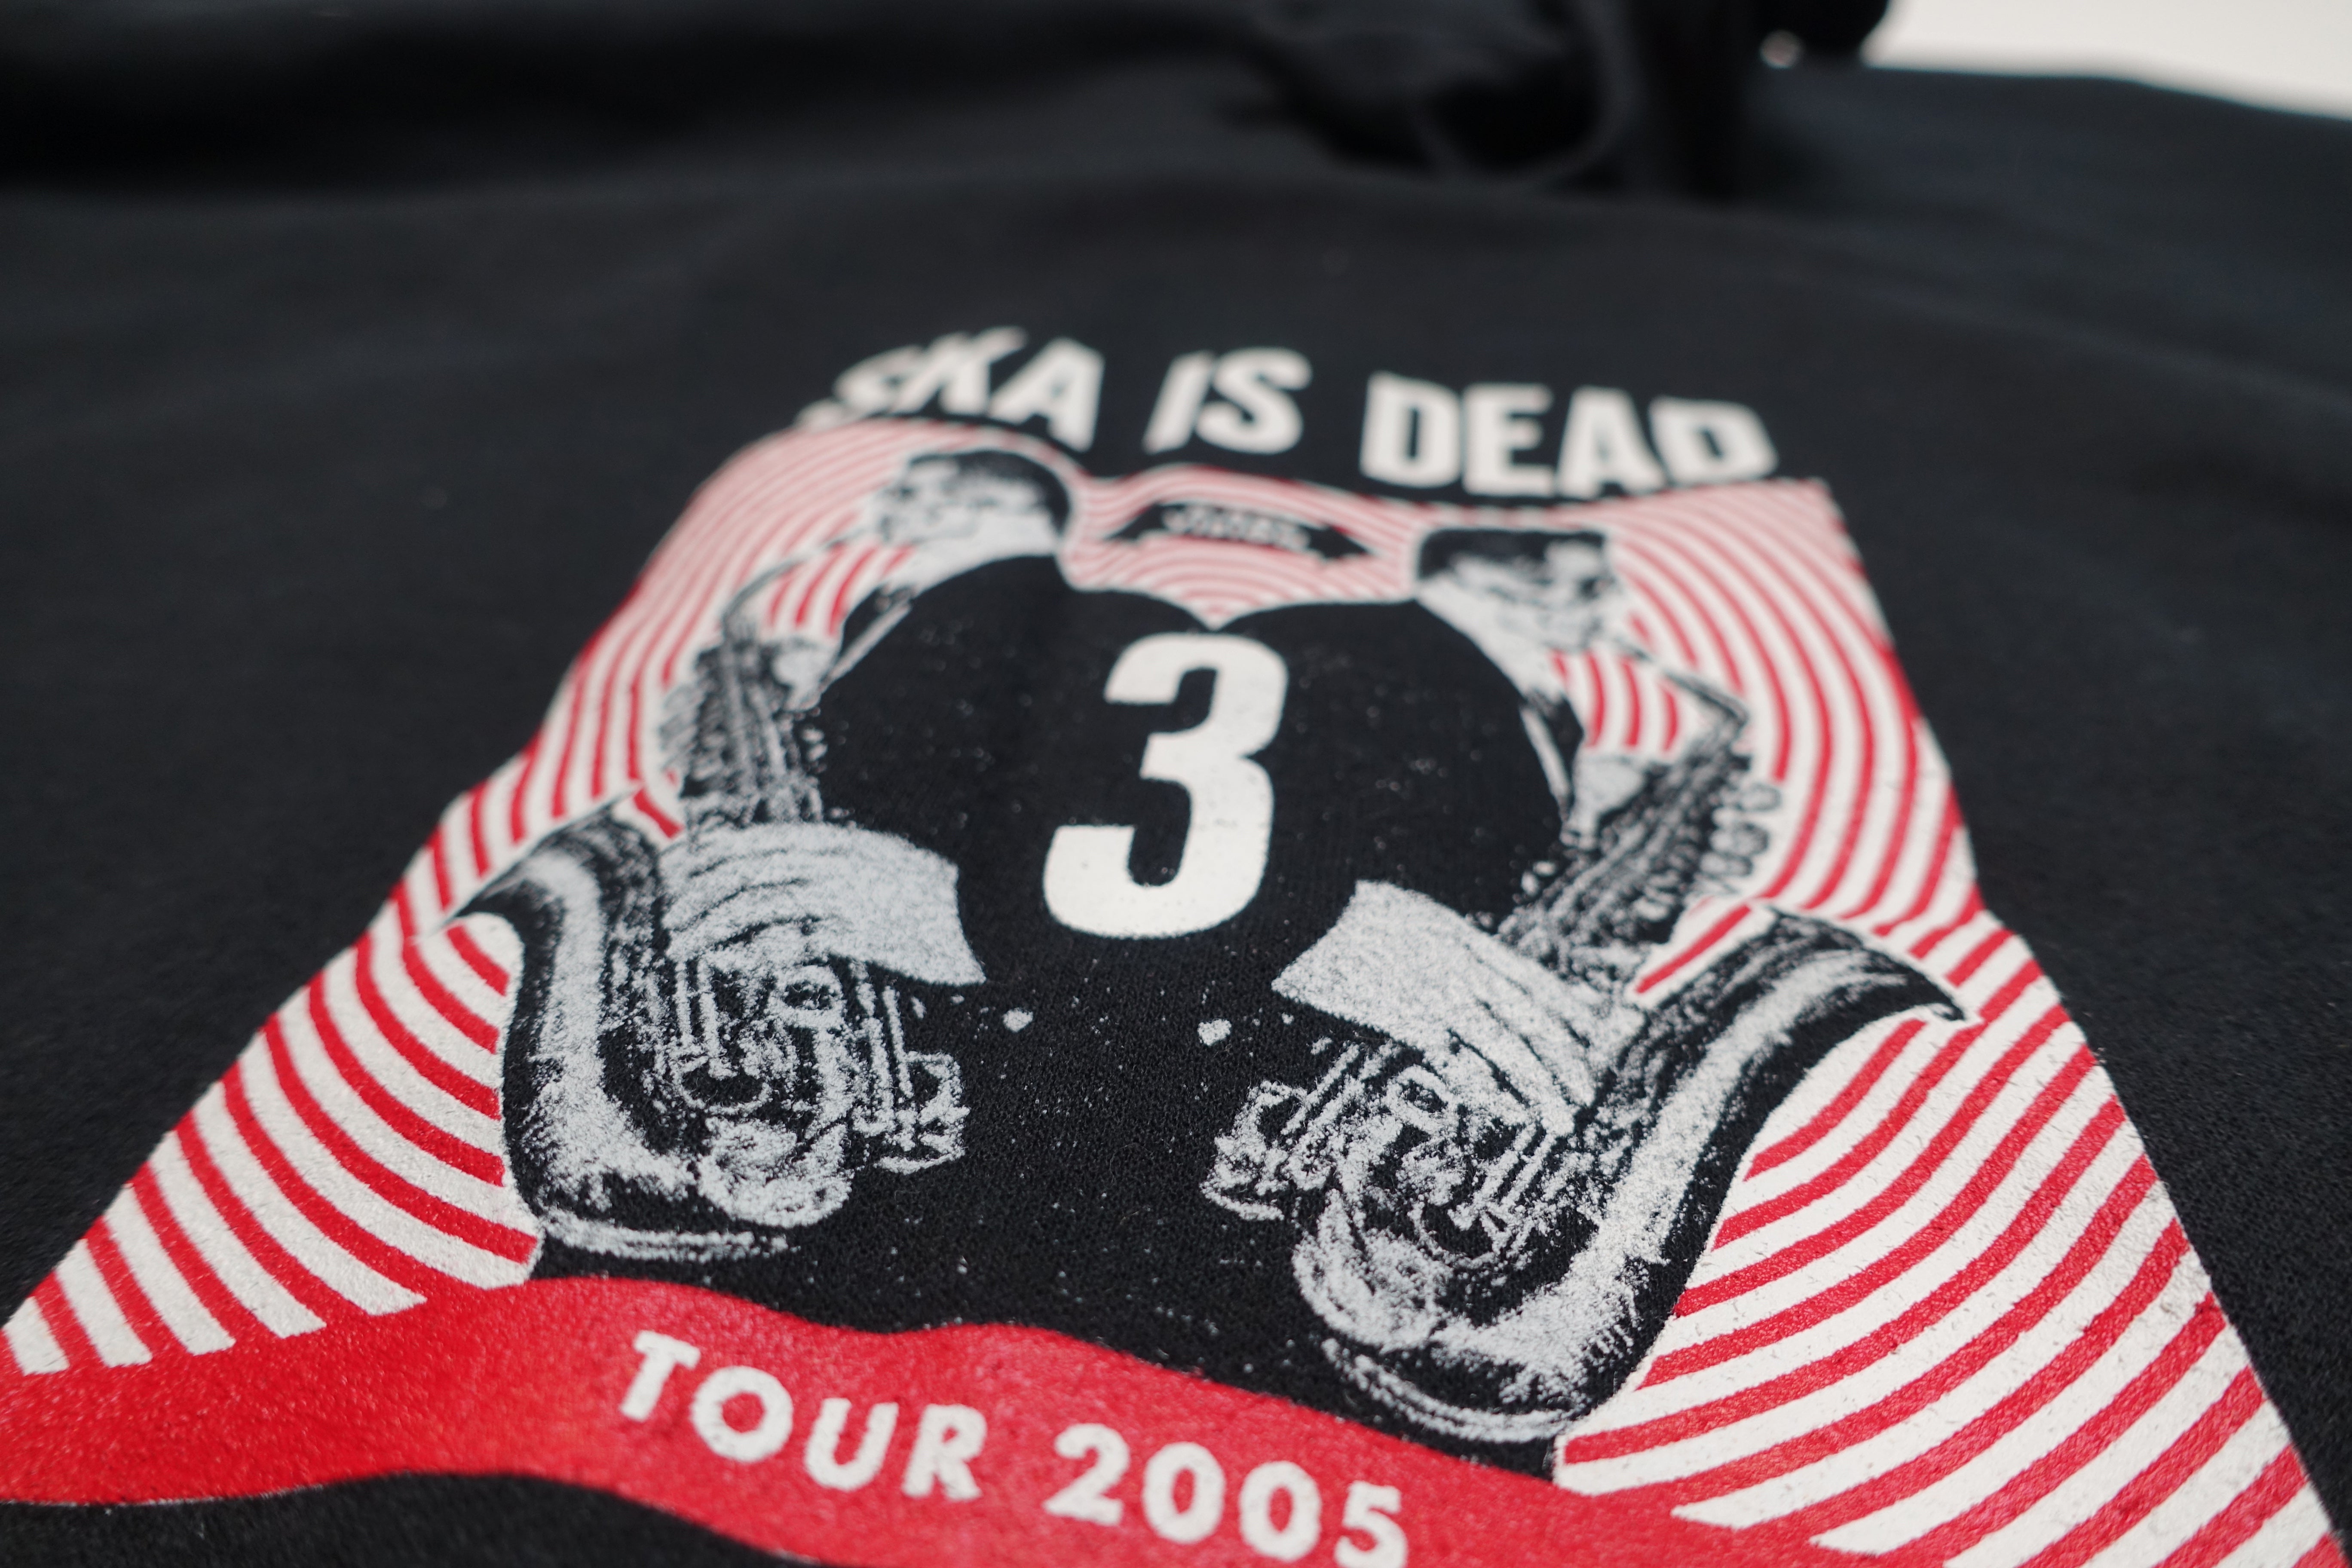 Ska Is Dead 3 – 2005 Tour Hooded Sweat Shirt Size Large